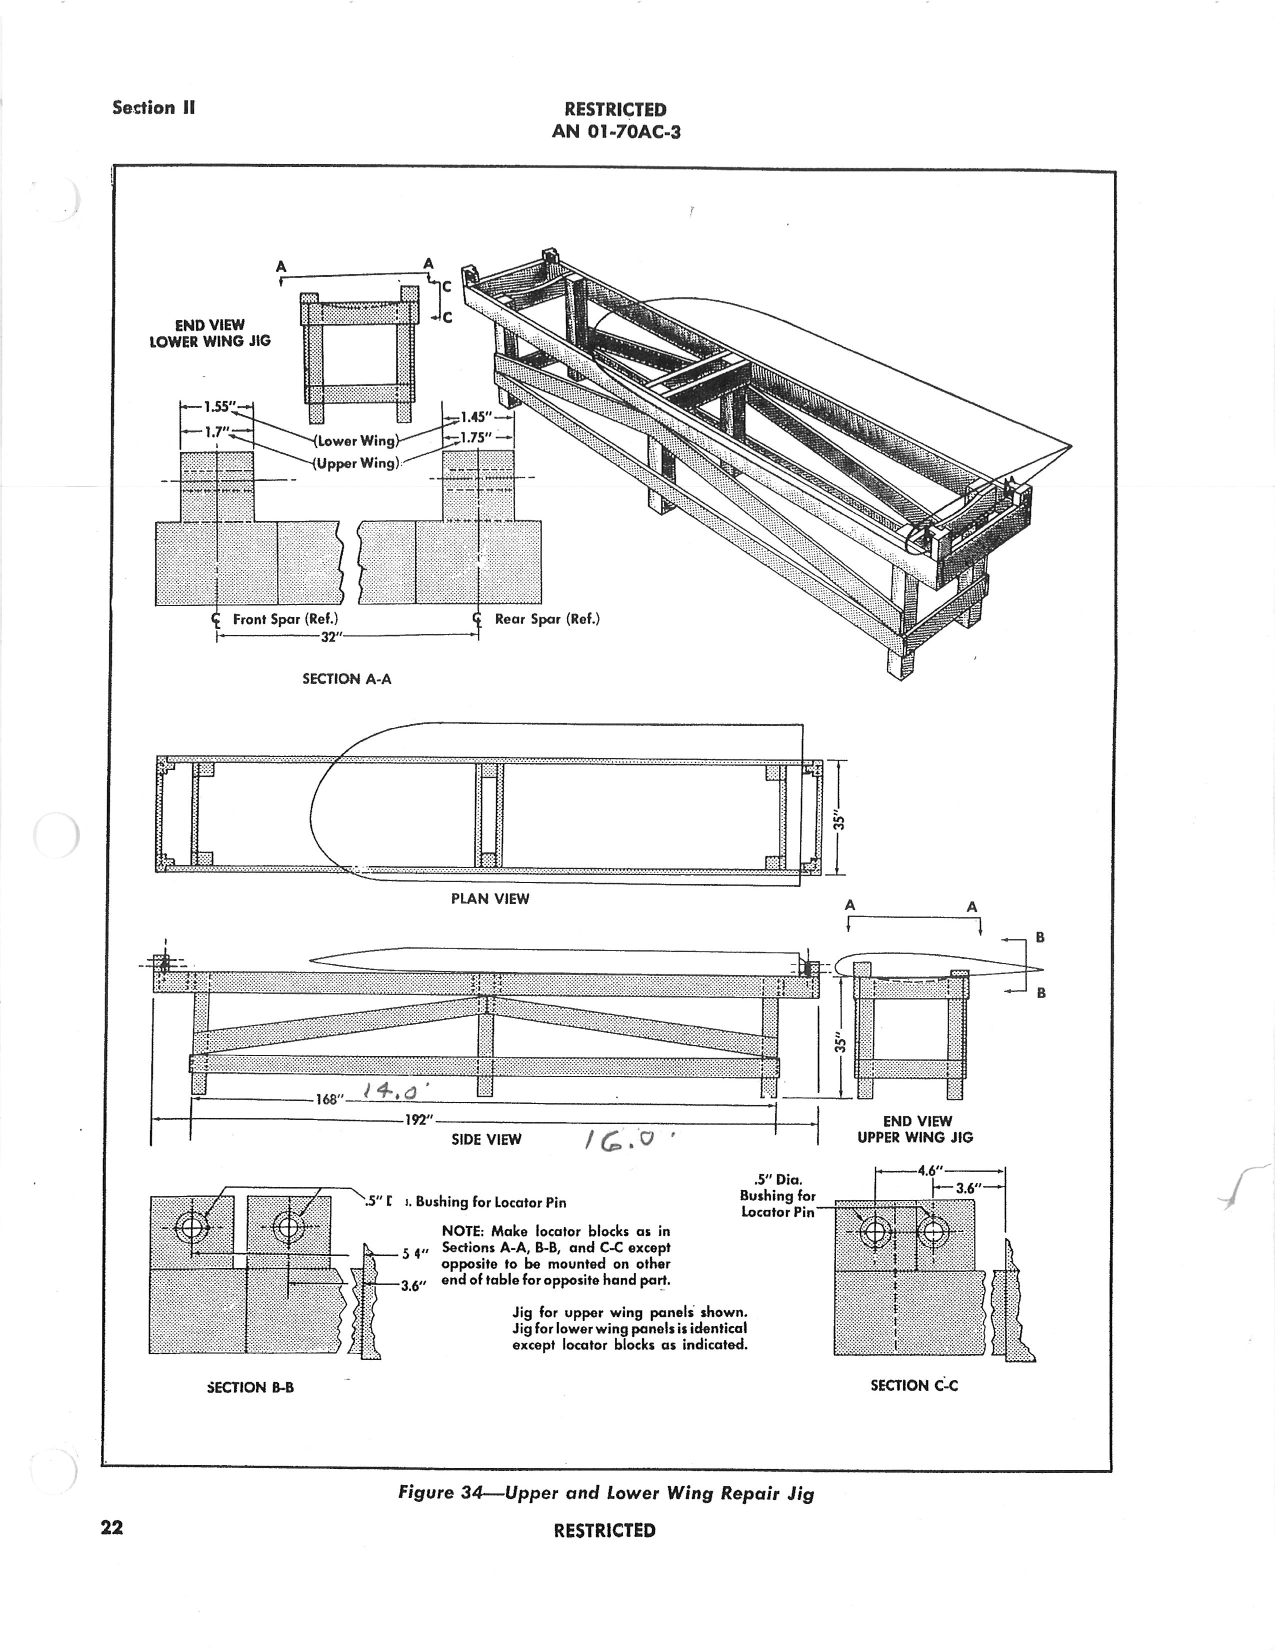 Sample page 51 from AirCorps Library document: Structural Repair Instructions - PT-13D / N2S-5